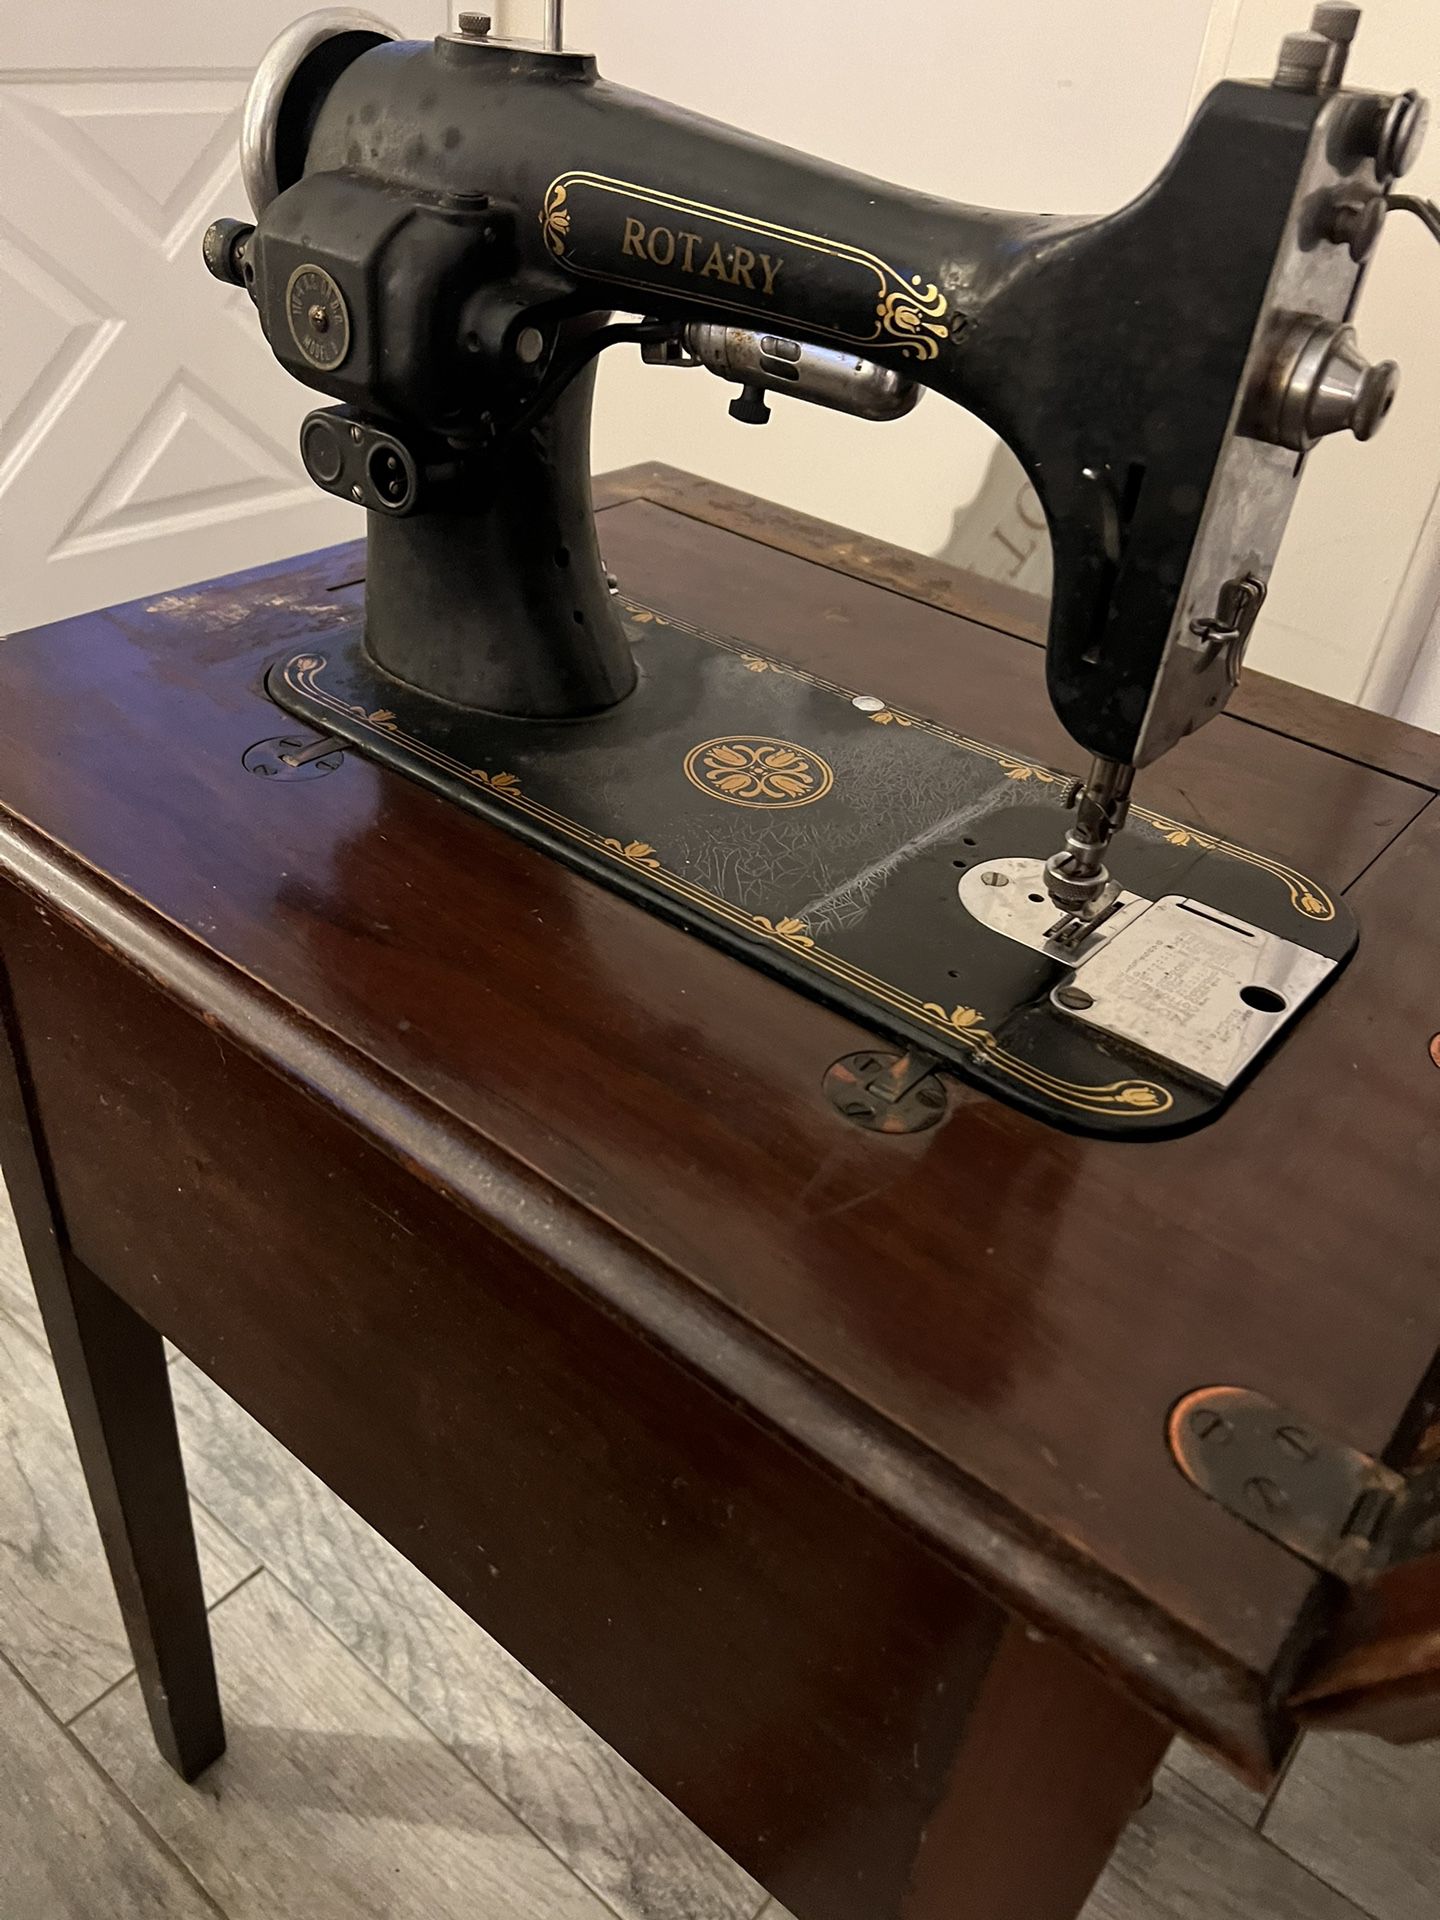 White” Rotary” Antique Sewing Machine In Cab